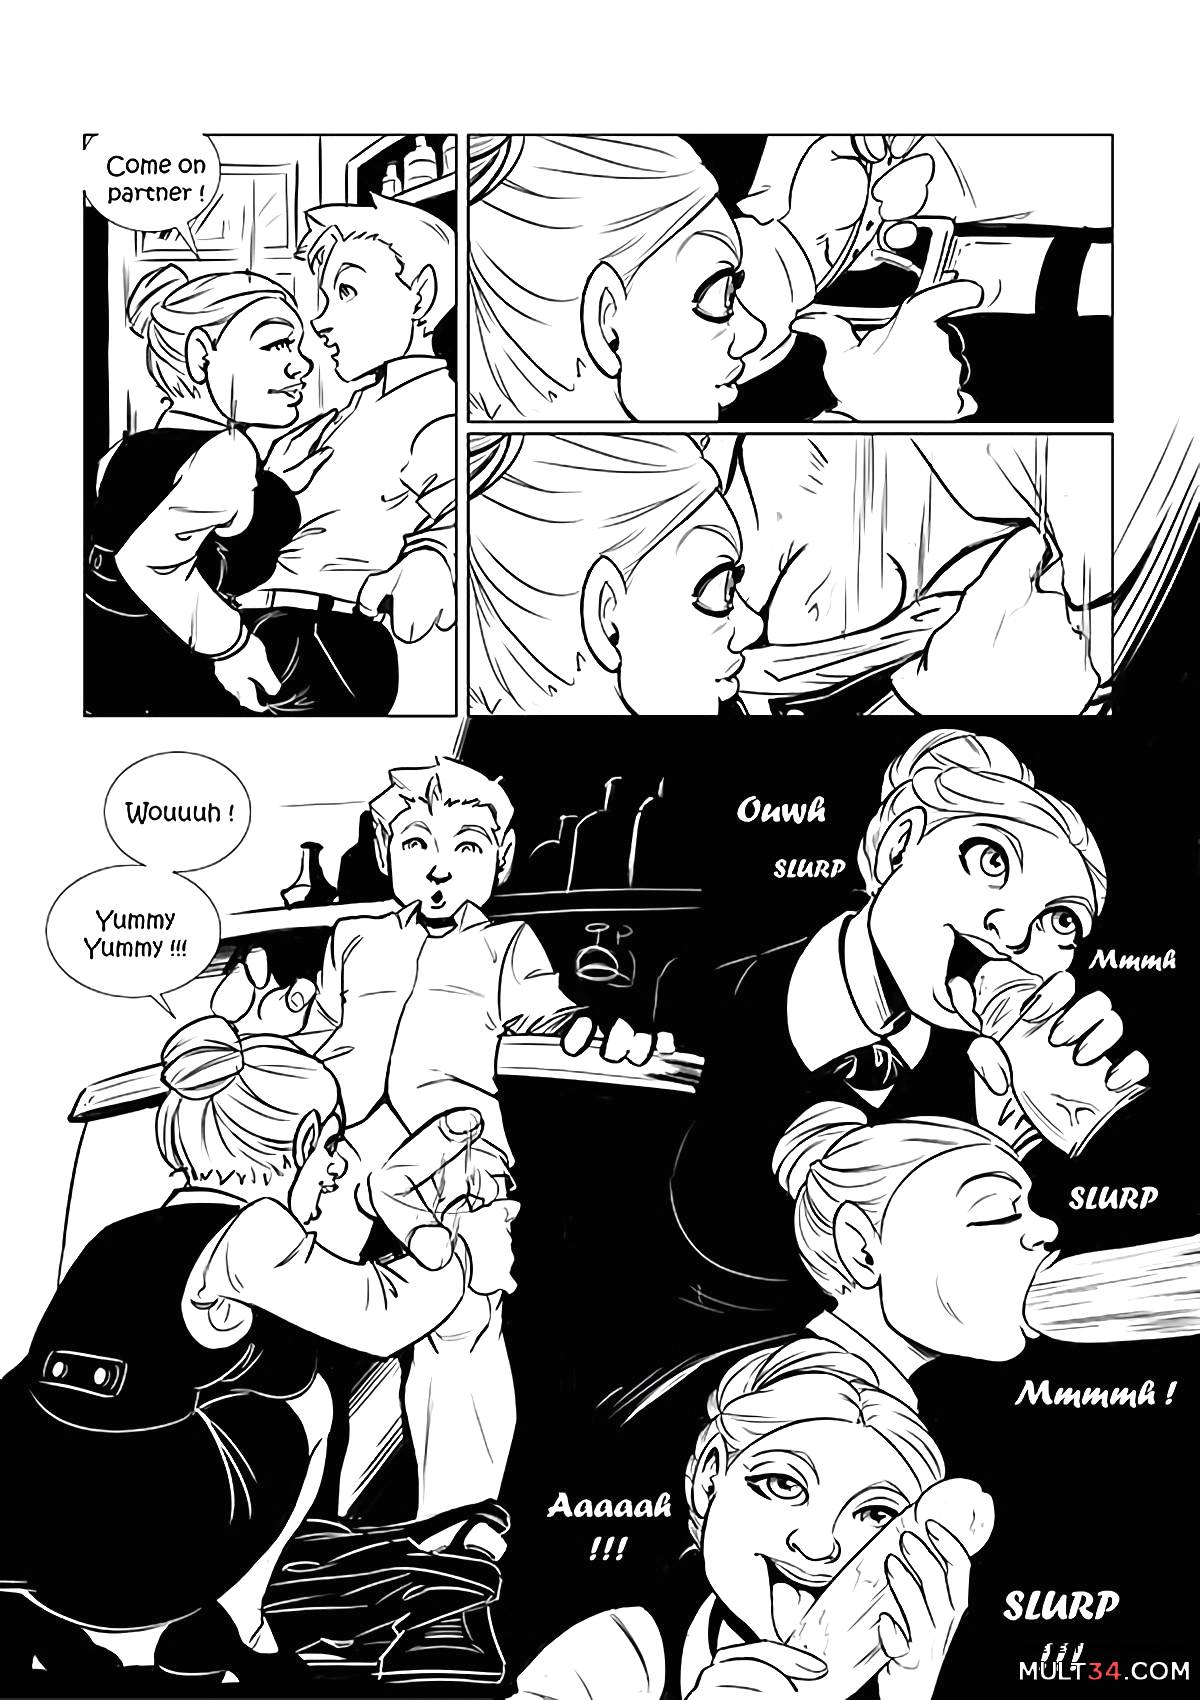 The Waitress - Valentine's day special page 5